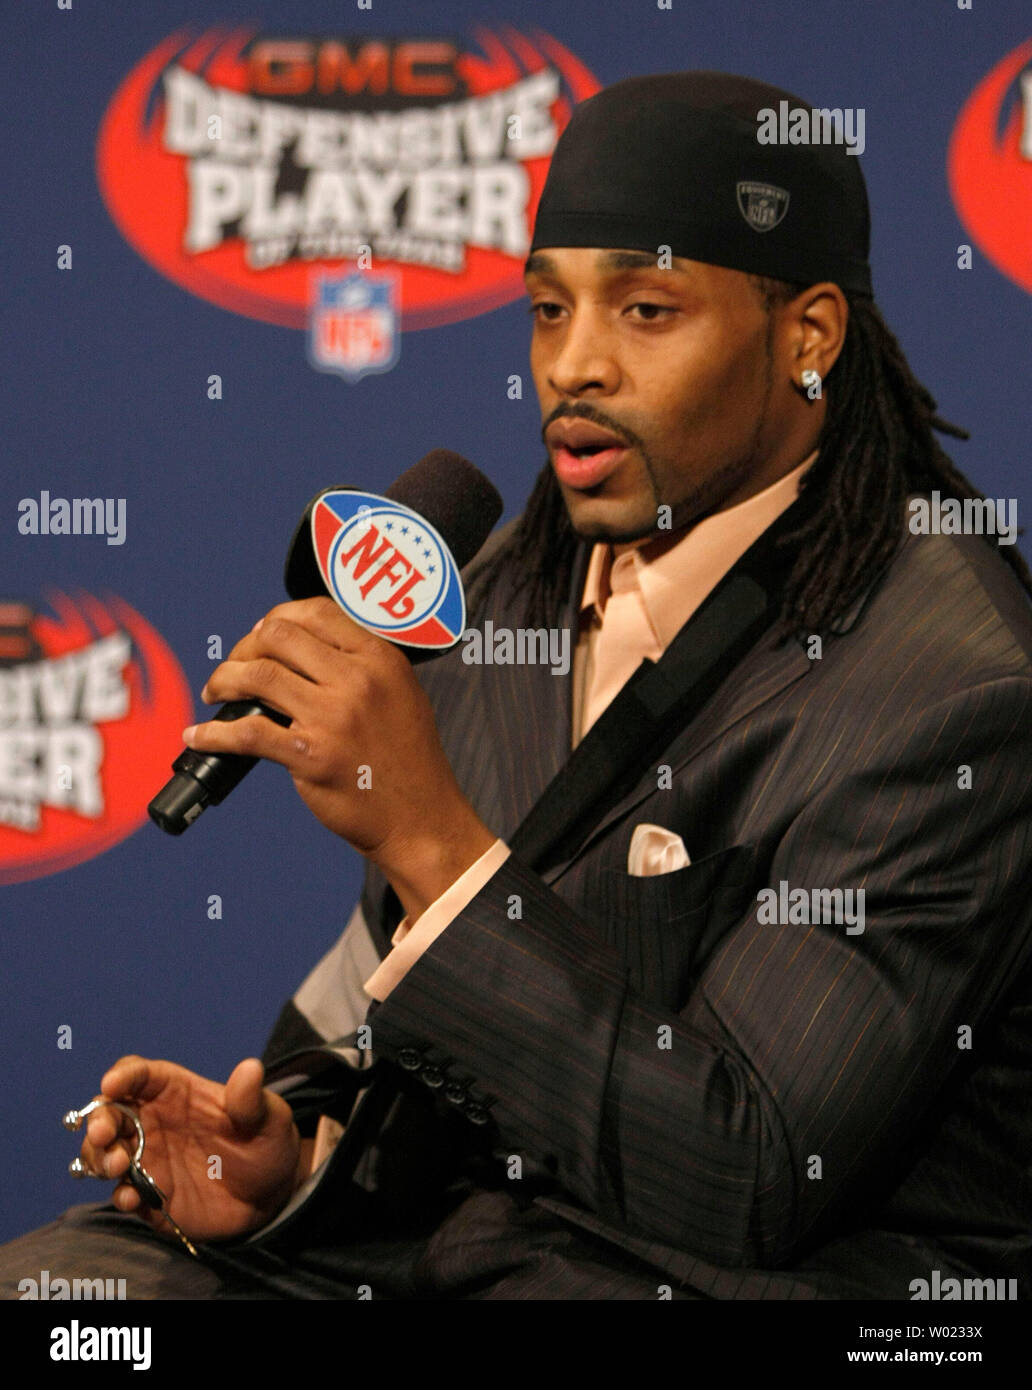 Indianapolis Colts safety Bob Sanders jangles the keys to his new GMC truck after being named the 2007 defensive player of the year during a press conference at the NFL's Super Bowl XLII media center in Phoenix on January 31, 2008.   (UPI Photo/Gary C. Caskey) Stock Photo